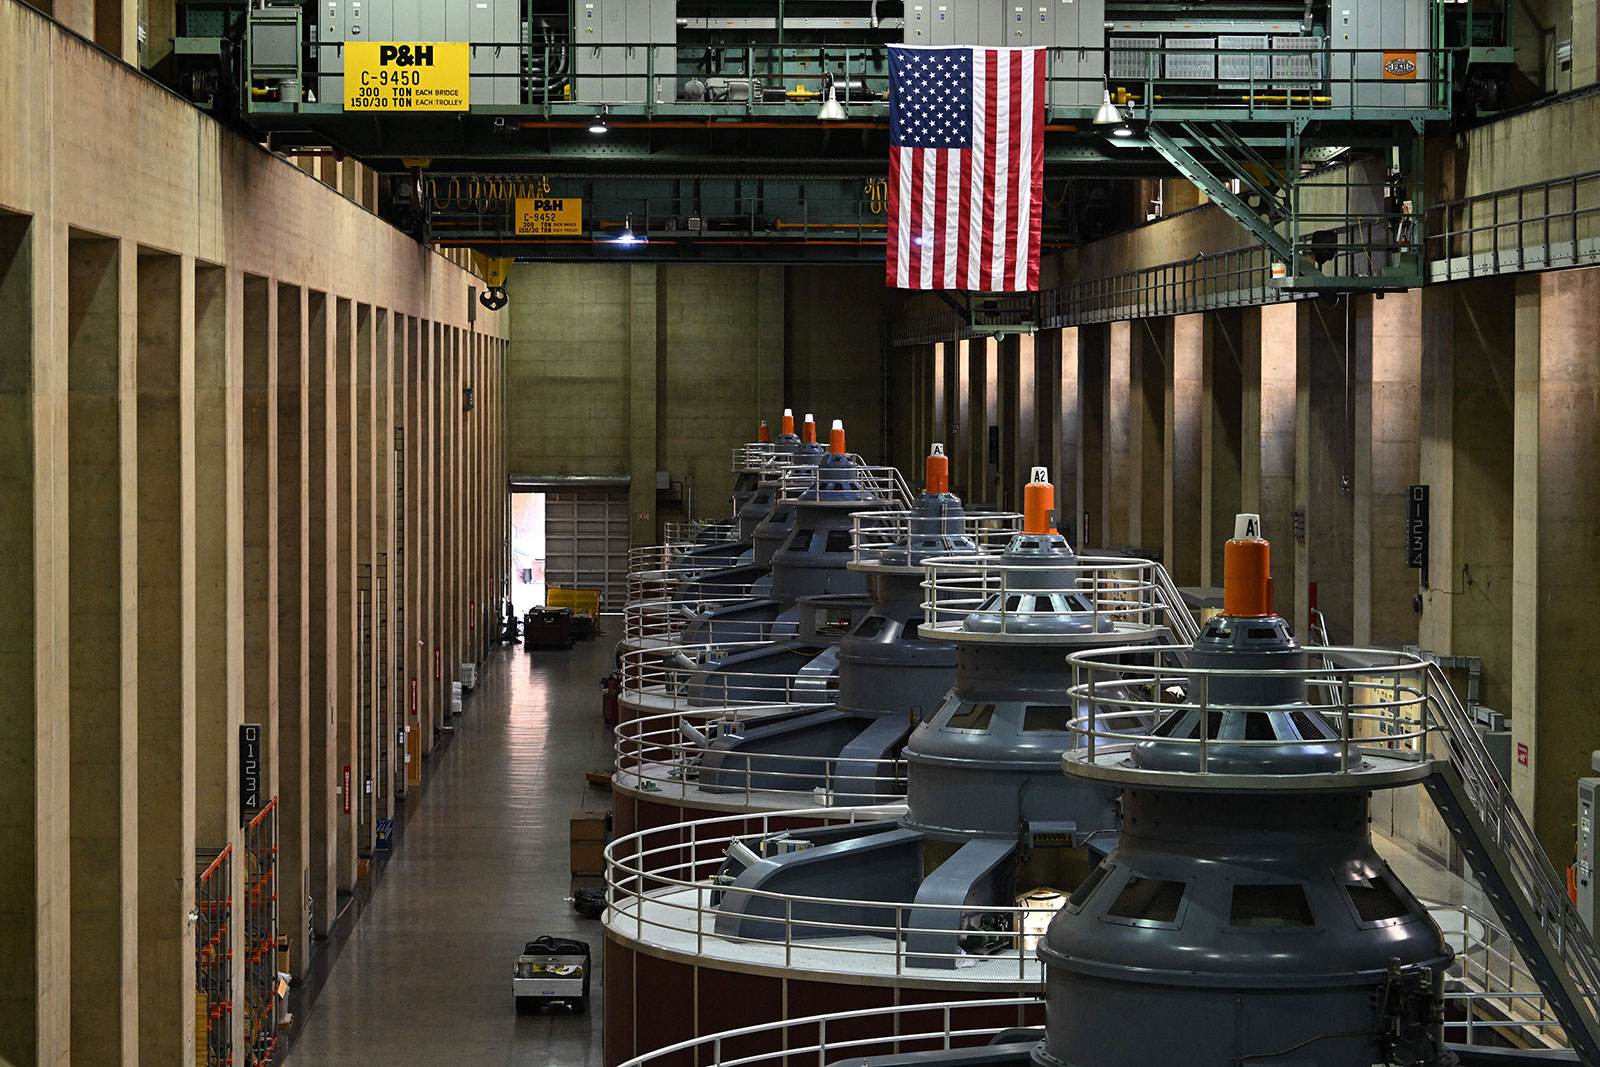 The turbine room is part of the system to generate hydroelectricity at the Hoover Dam.